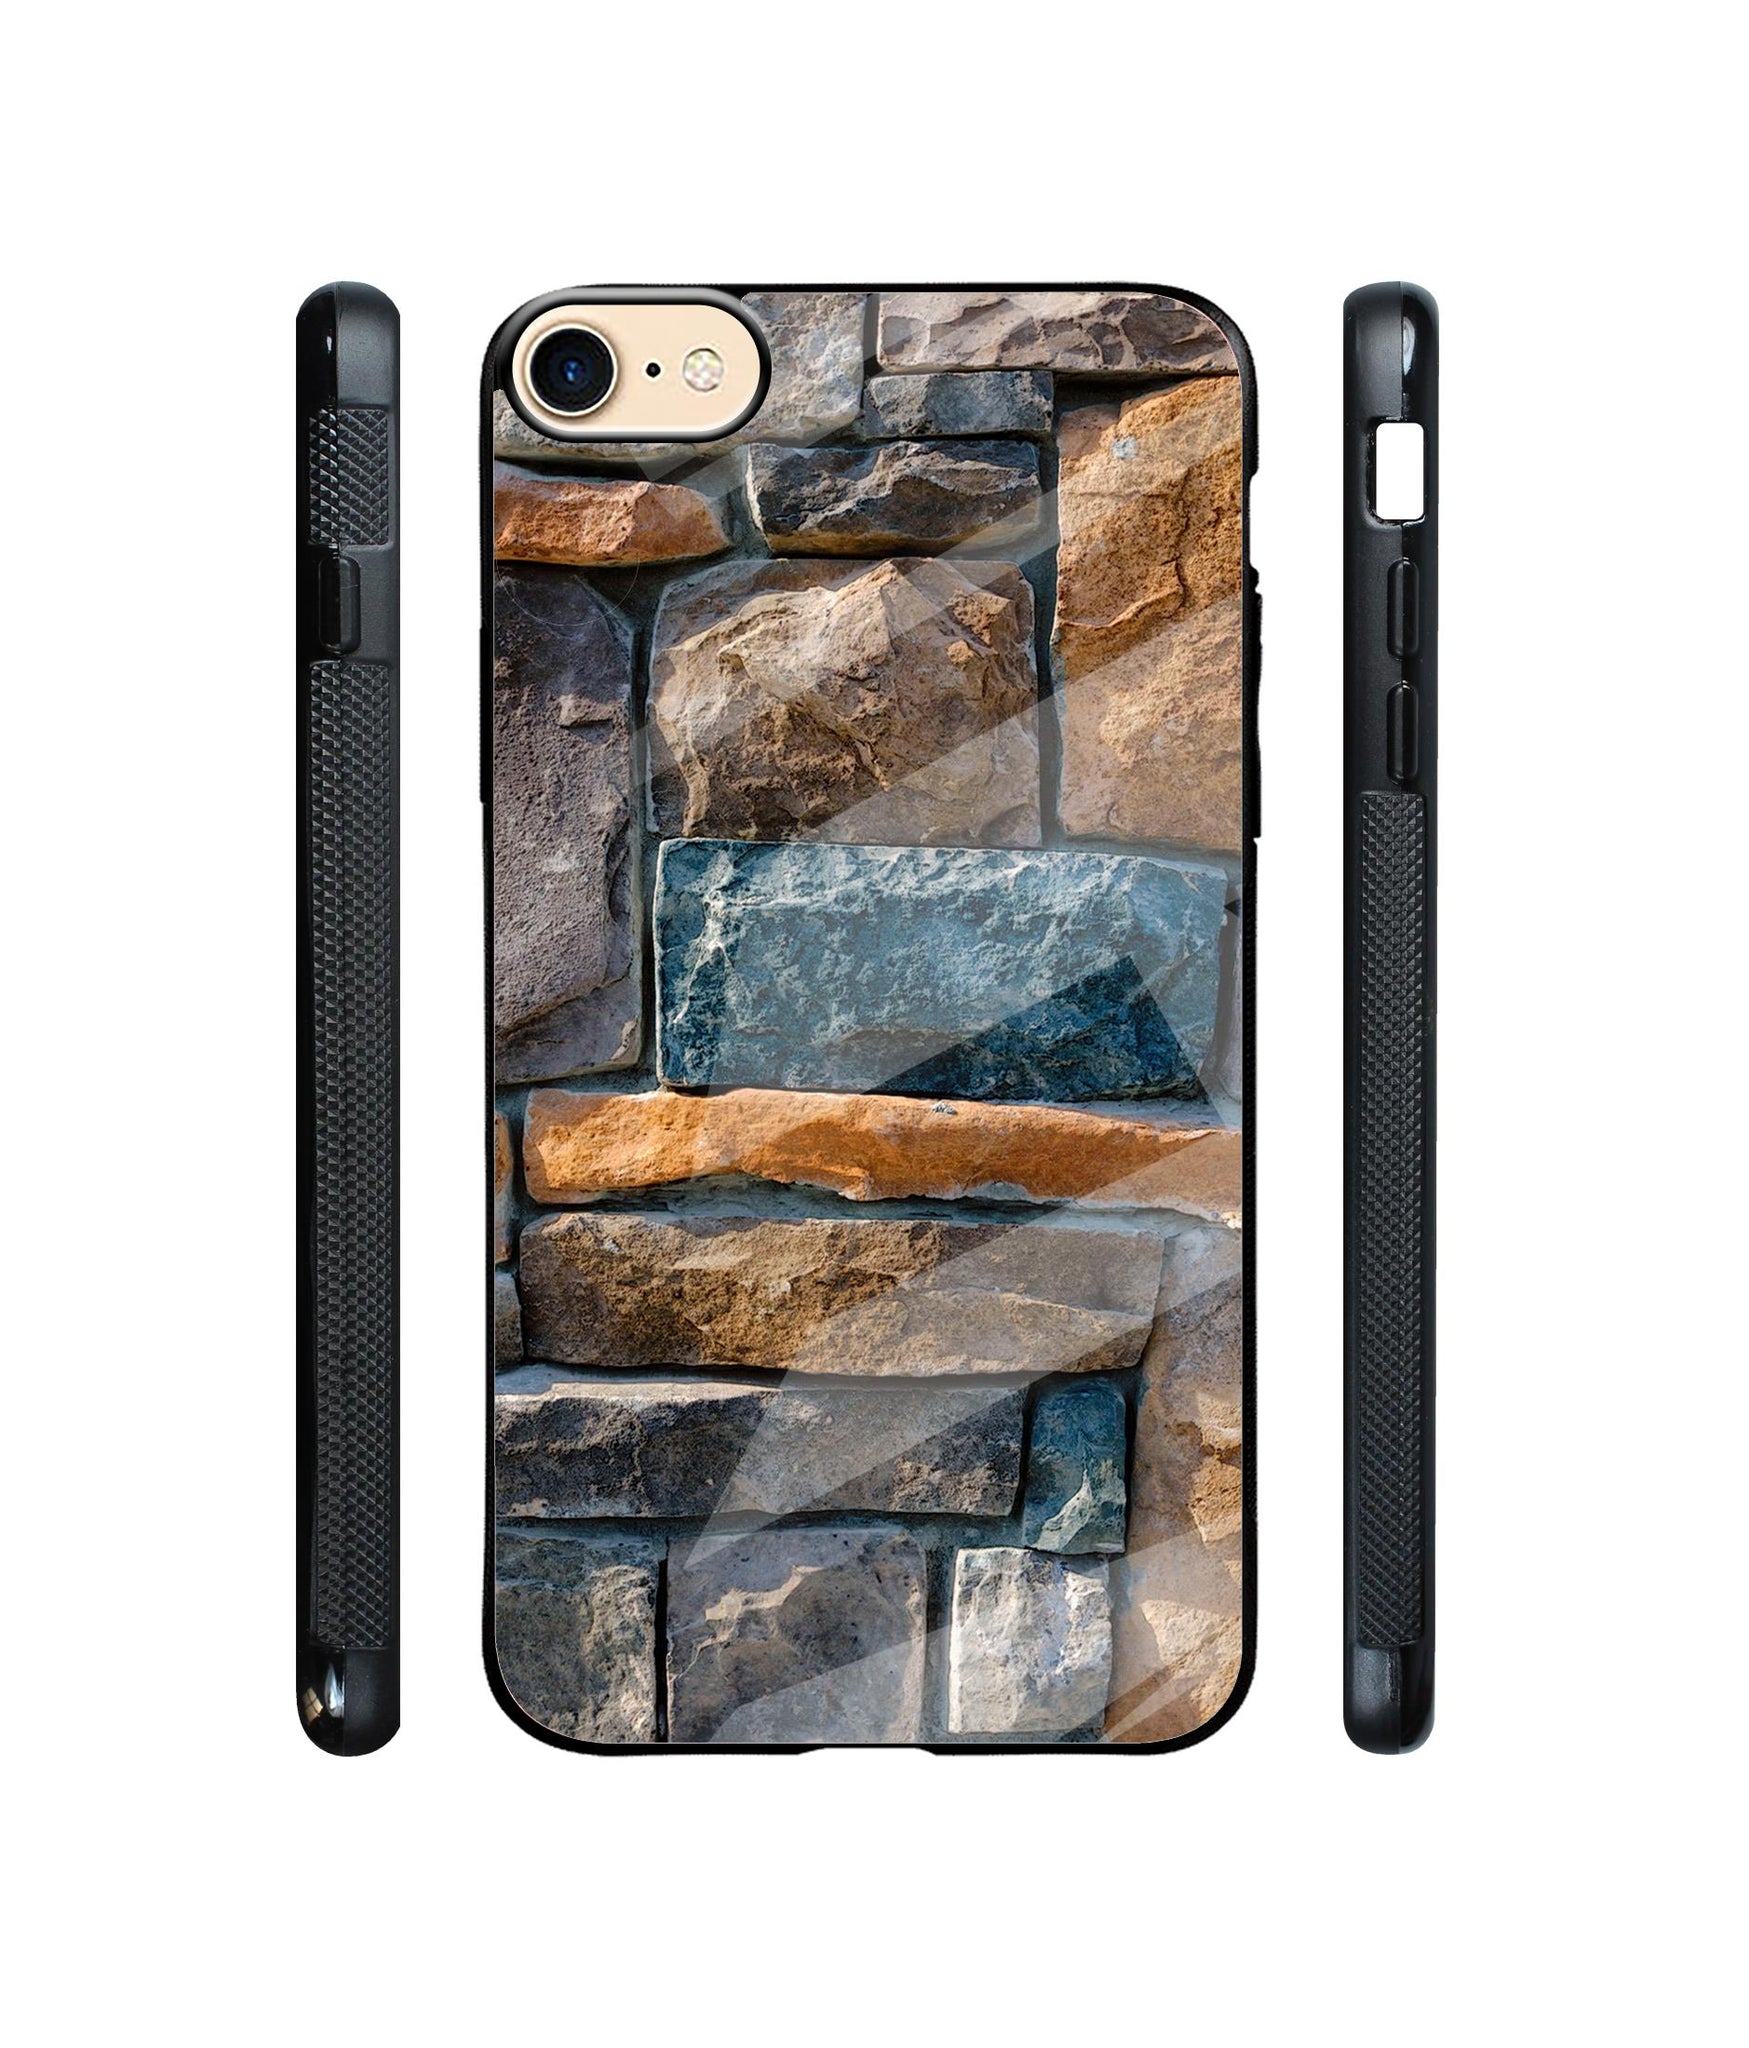 Decorative Stone Cladding Designer Printed Glass Cover for Apple iPhone 7 / iPhone 8